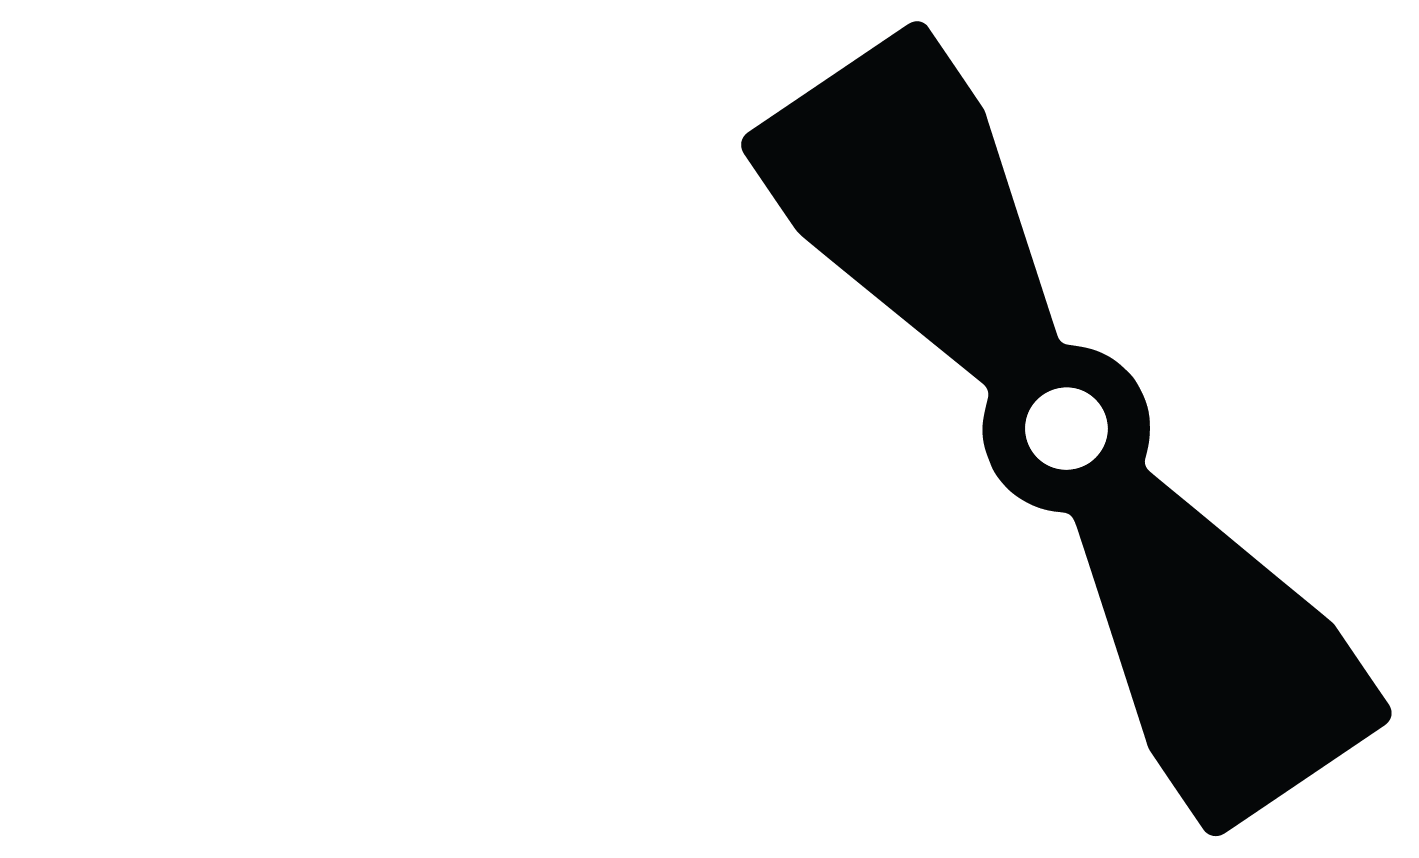 ZipXSynch: Simply a safer way to connect wires